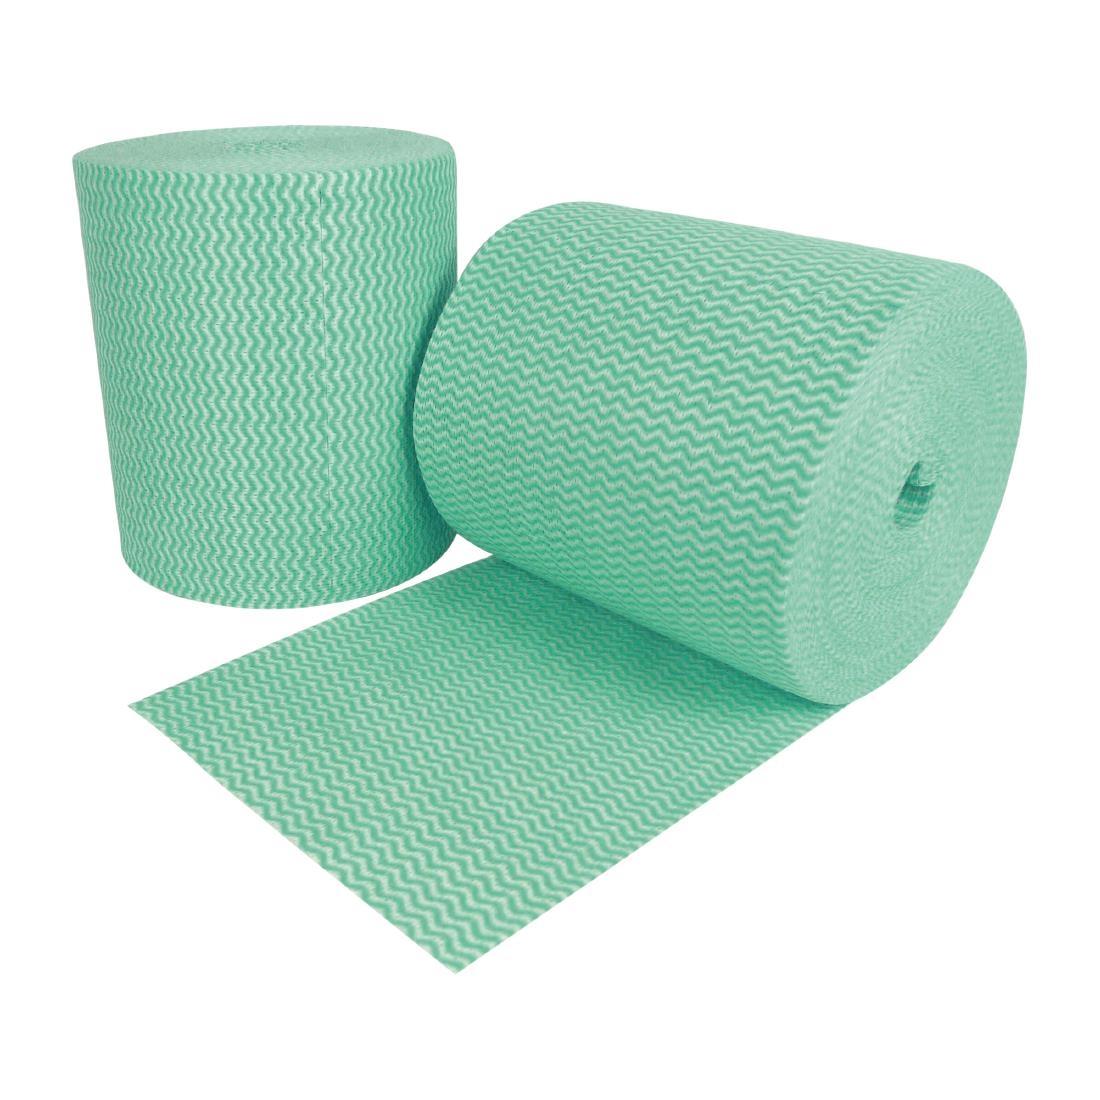 EcoTech Envirowipe Antibacterial Compostable Cleaning Cloths Green (Roll of 2 x 250) - FA215  - 1